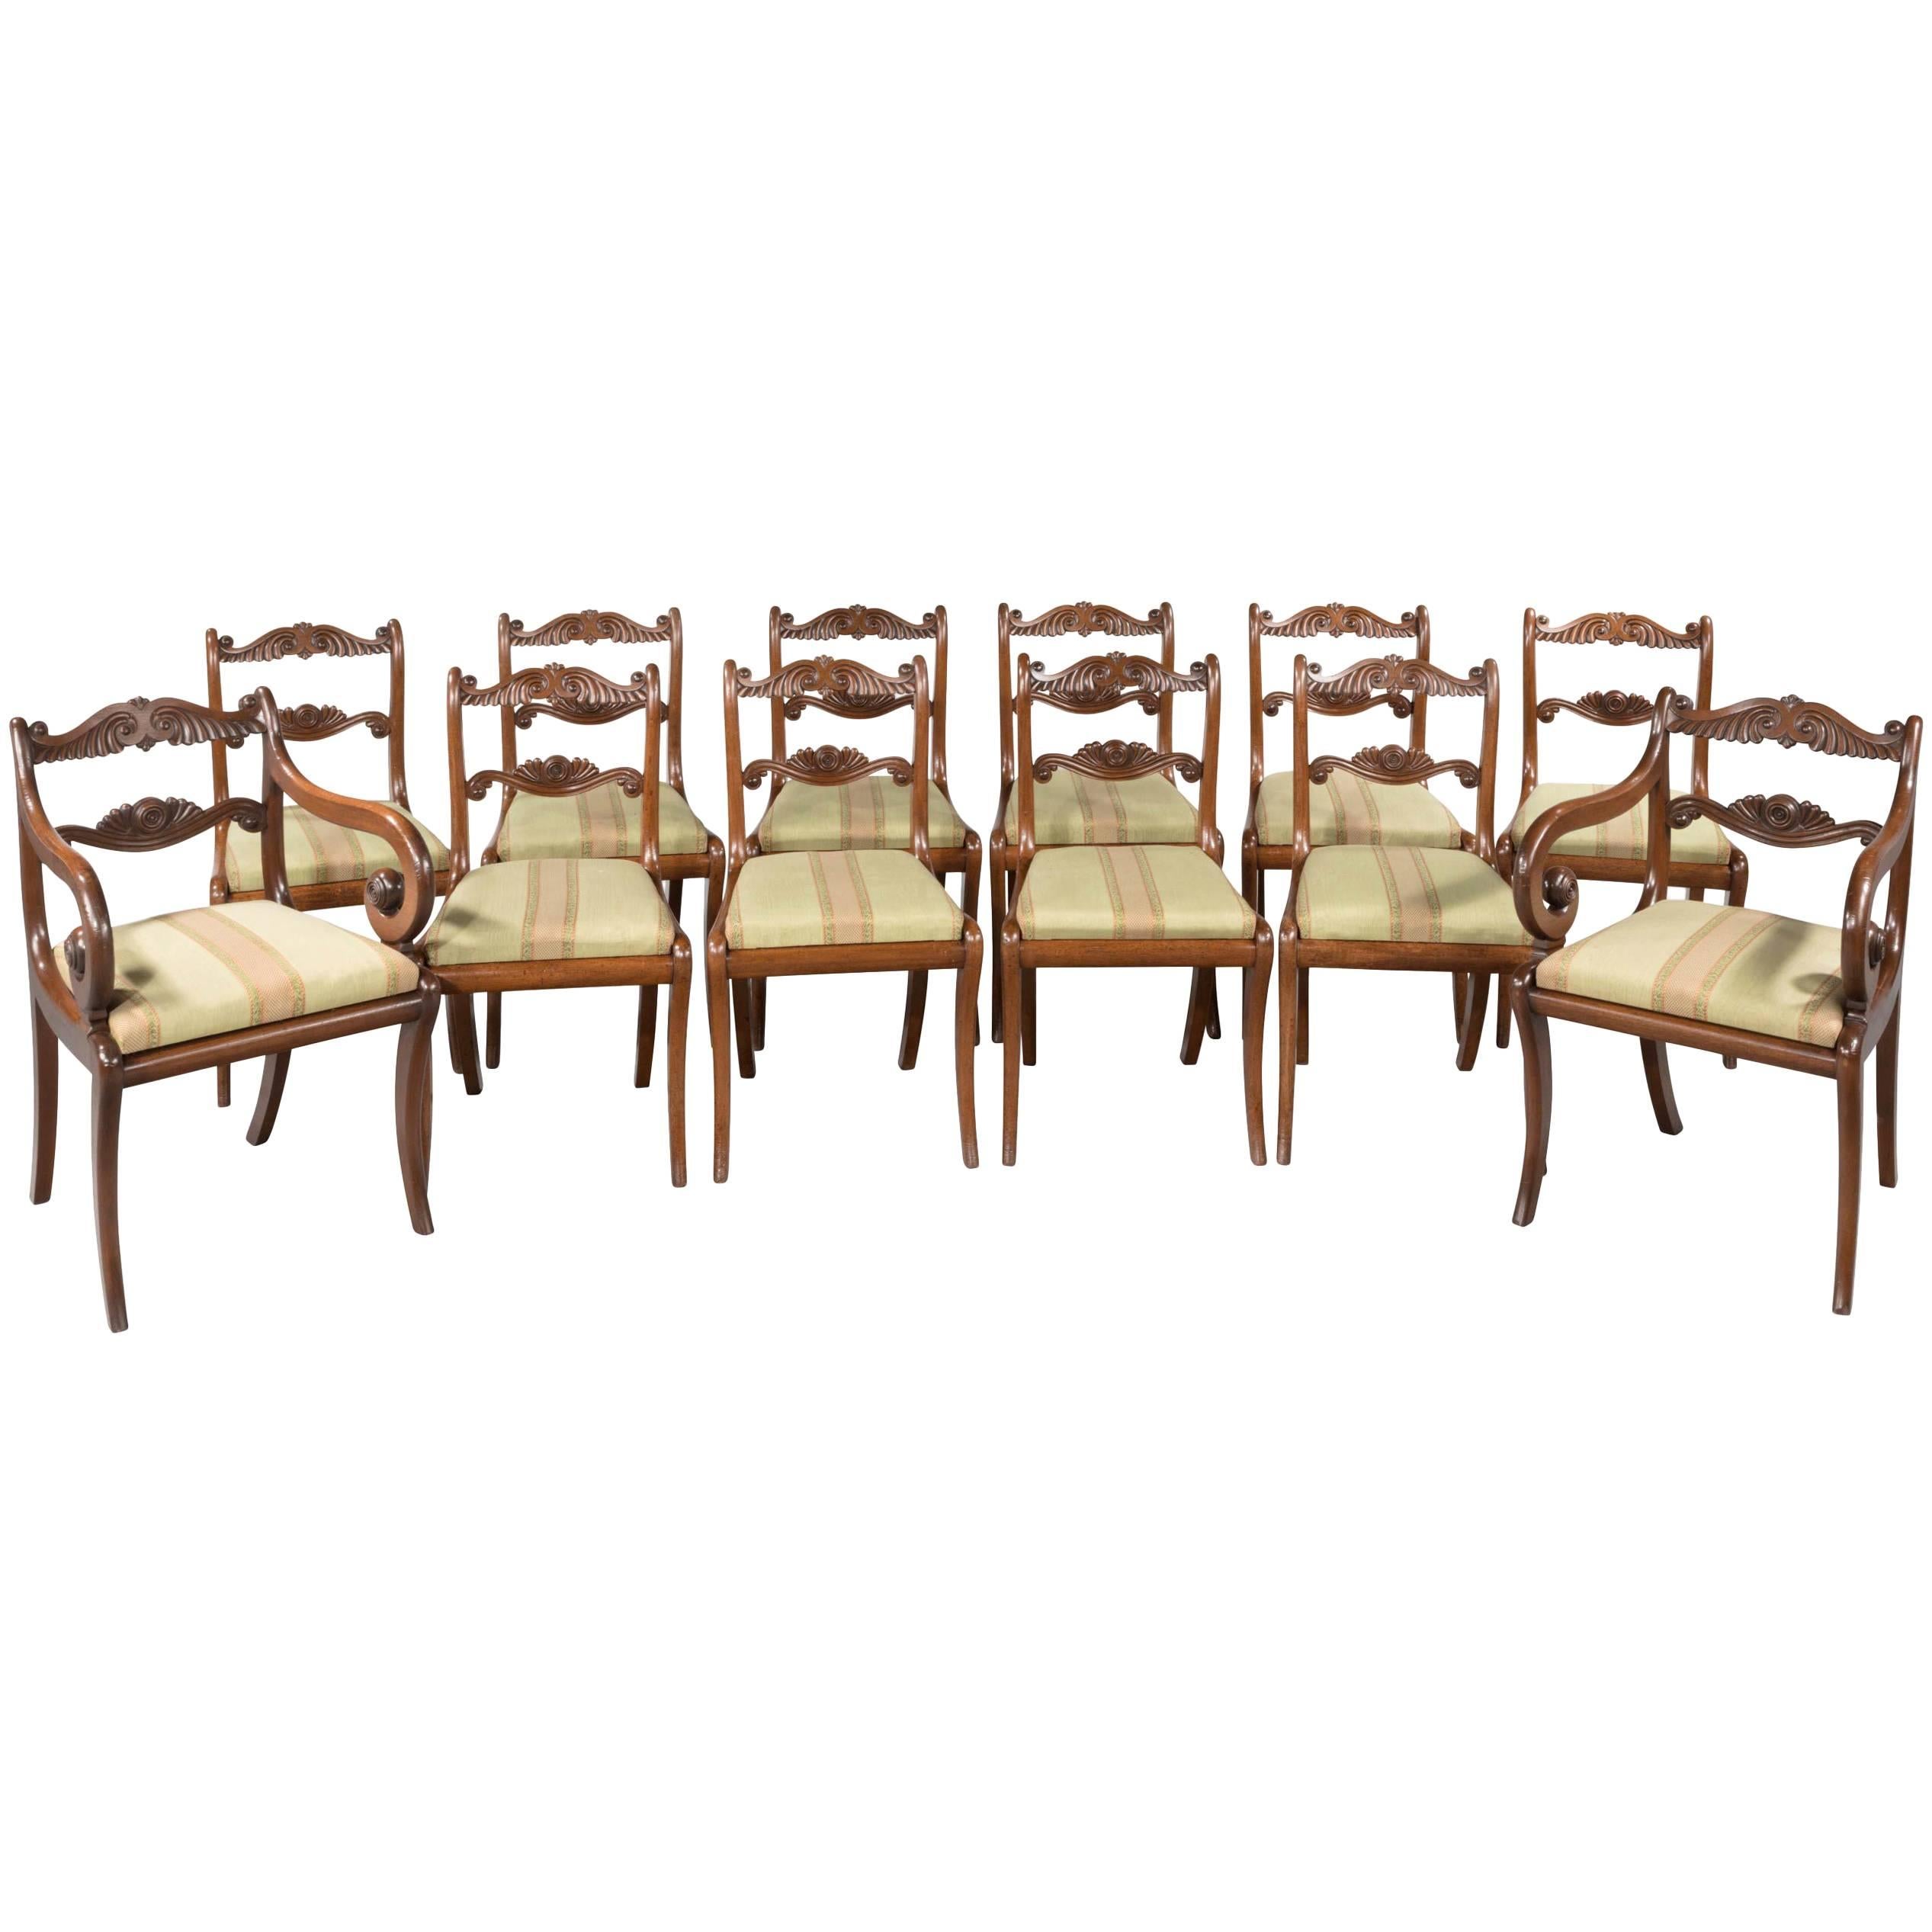 Set of 12 Regency Period Mahogany Dining Chairs